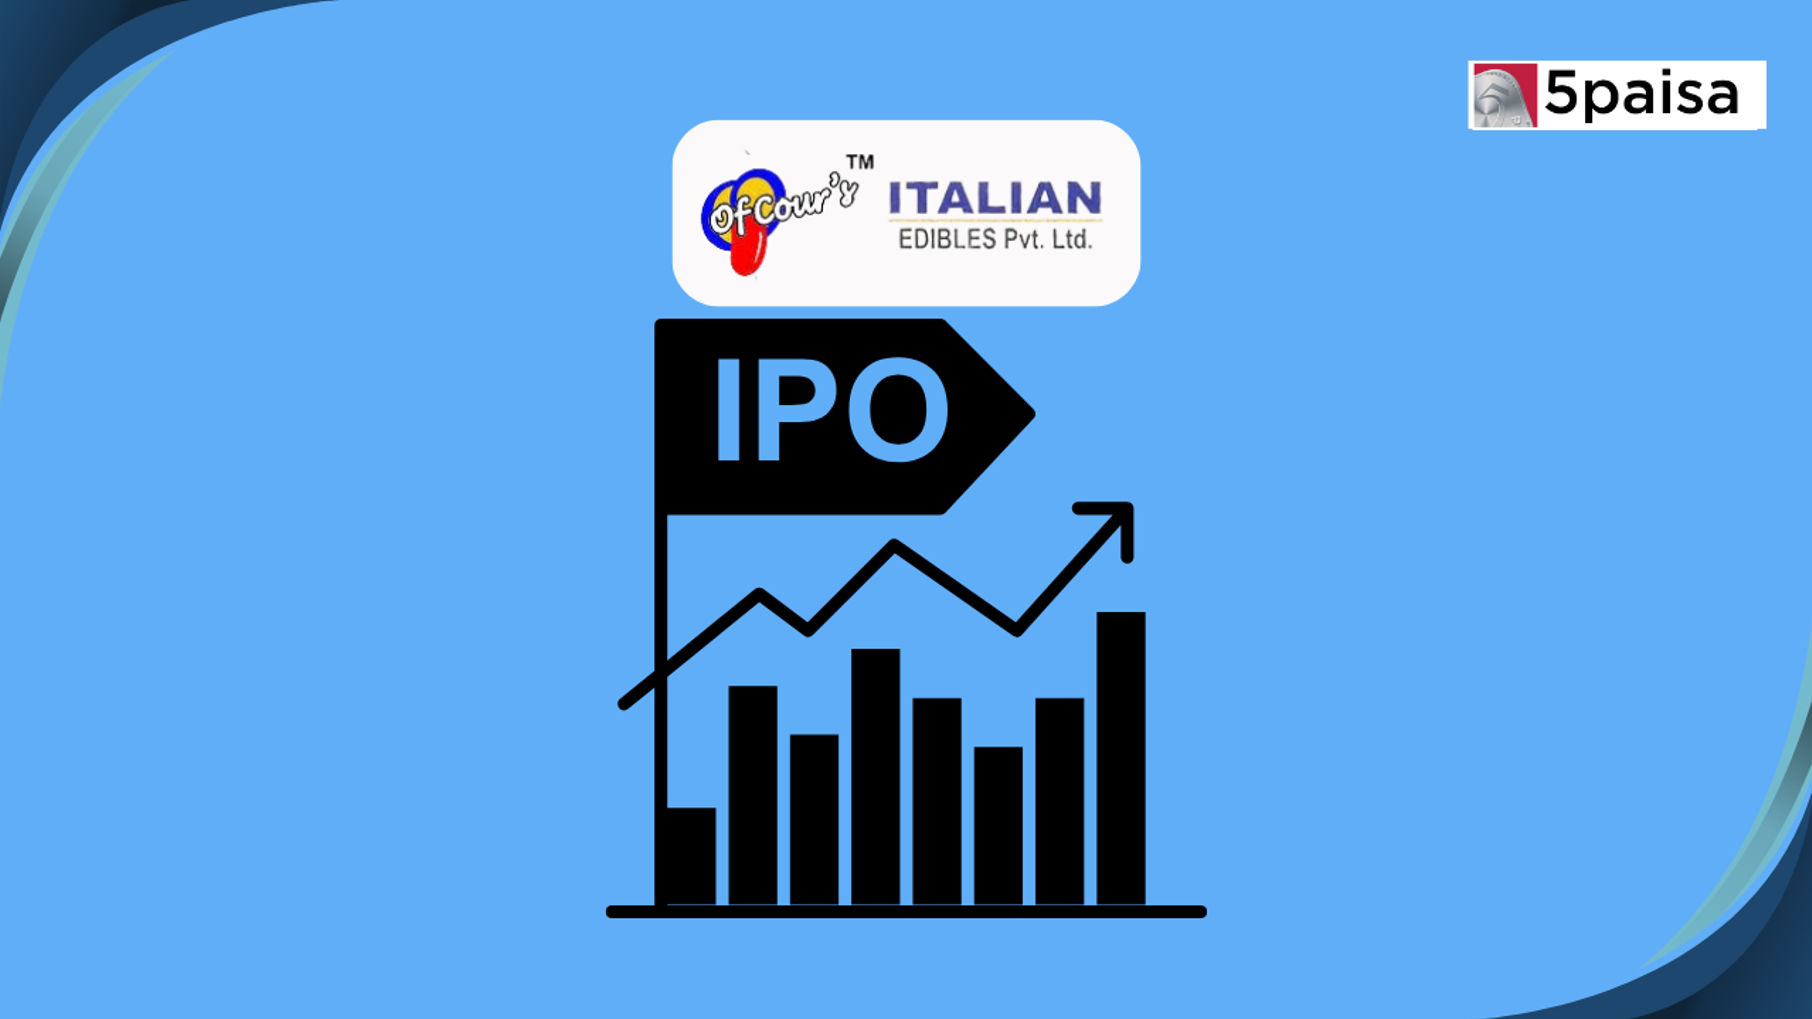 What you must know about Italian Edibles IPO?